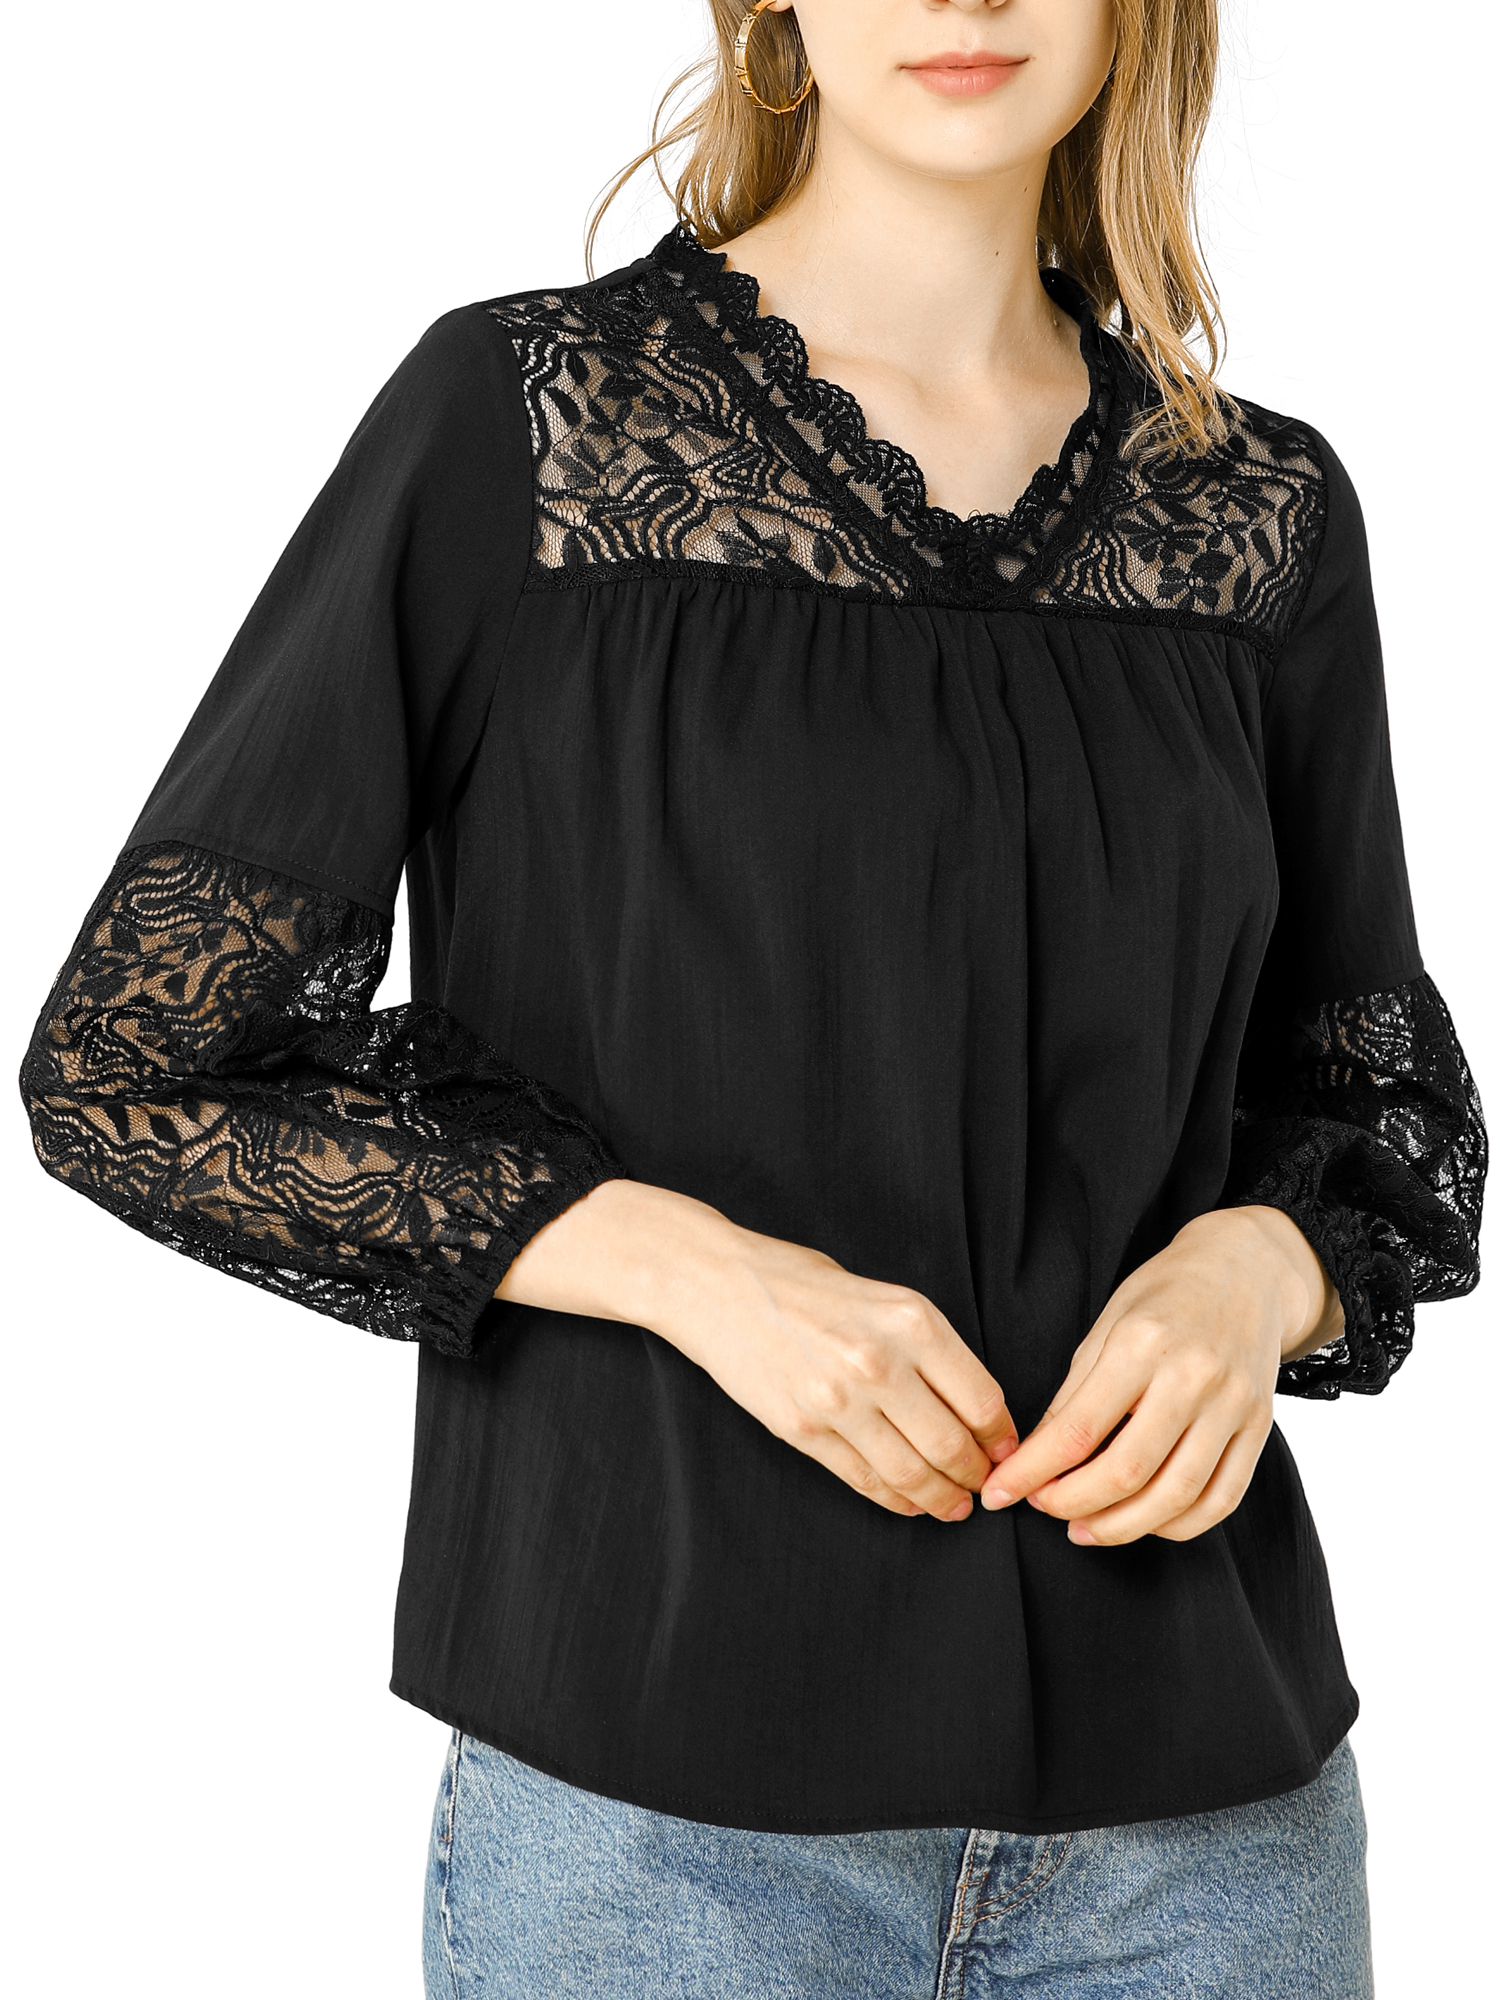 Women's Lace Floral Peasant Patchwork Long Puff Sleeve V Neck Blouse - image 1 of 6